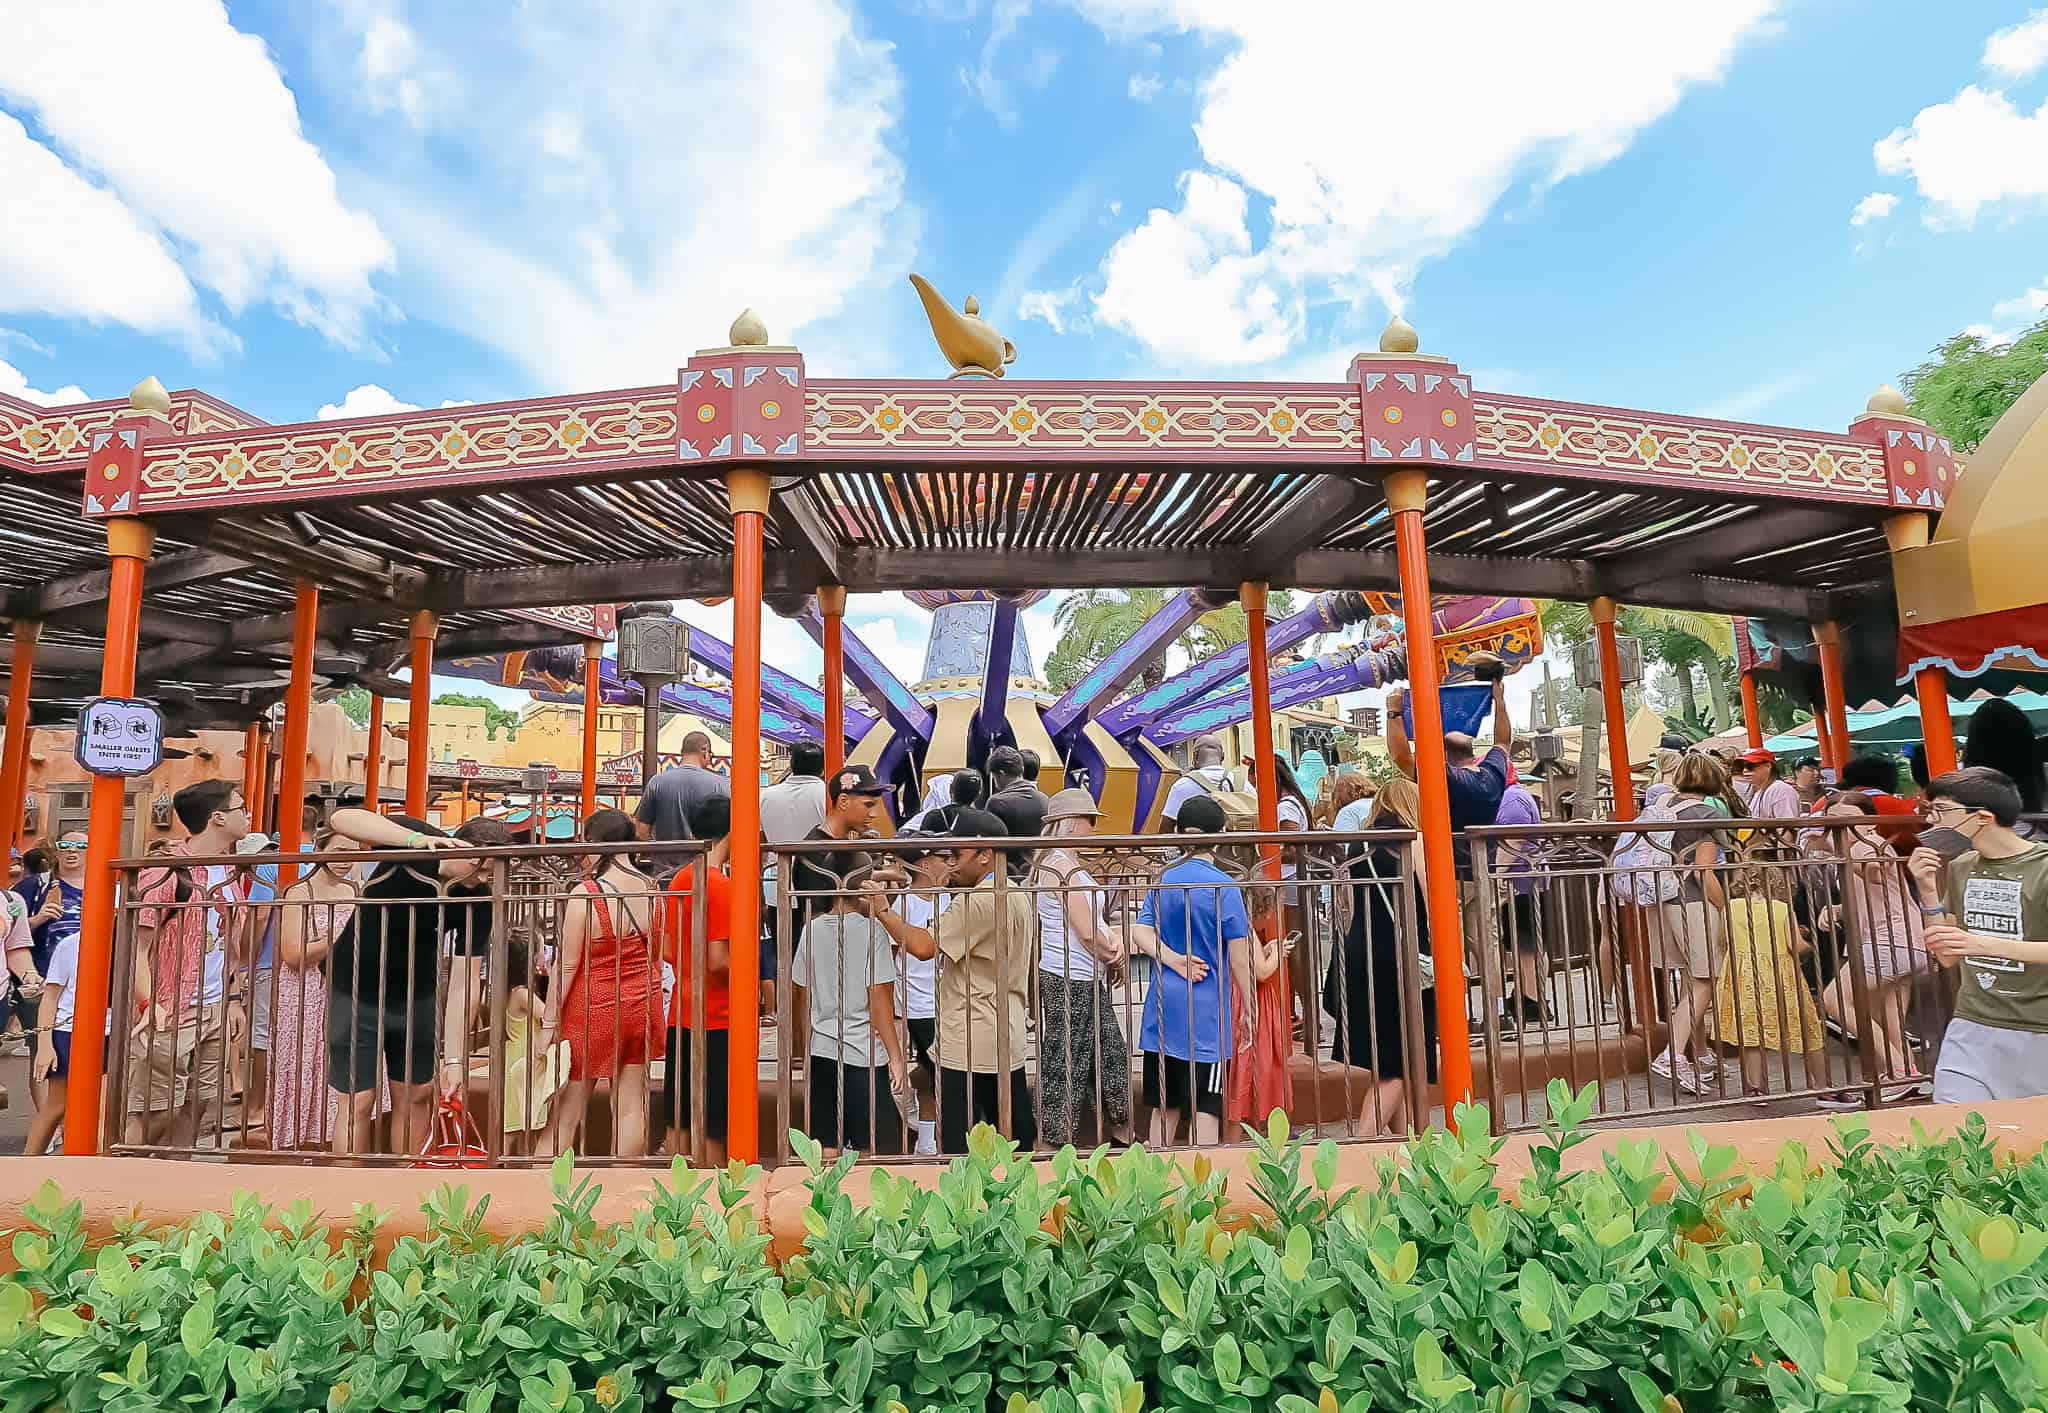 A longe queue of guests waiting to ride the Magic Carpets. 